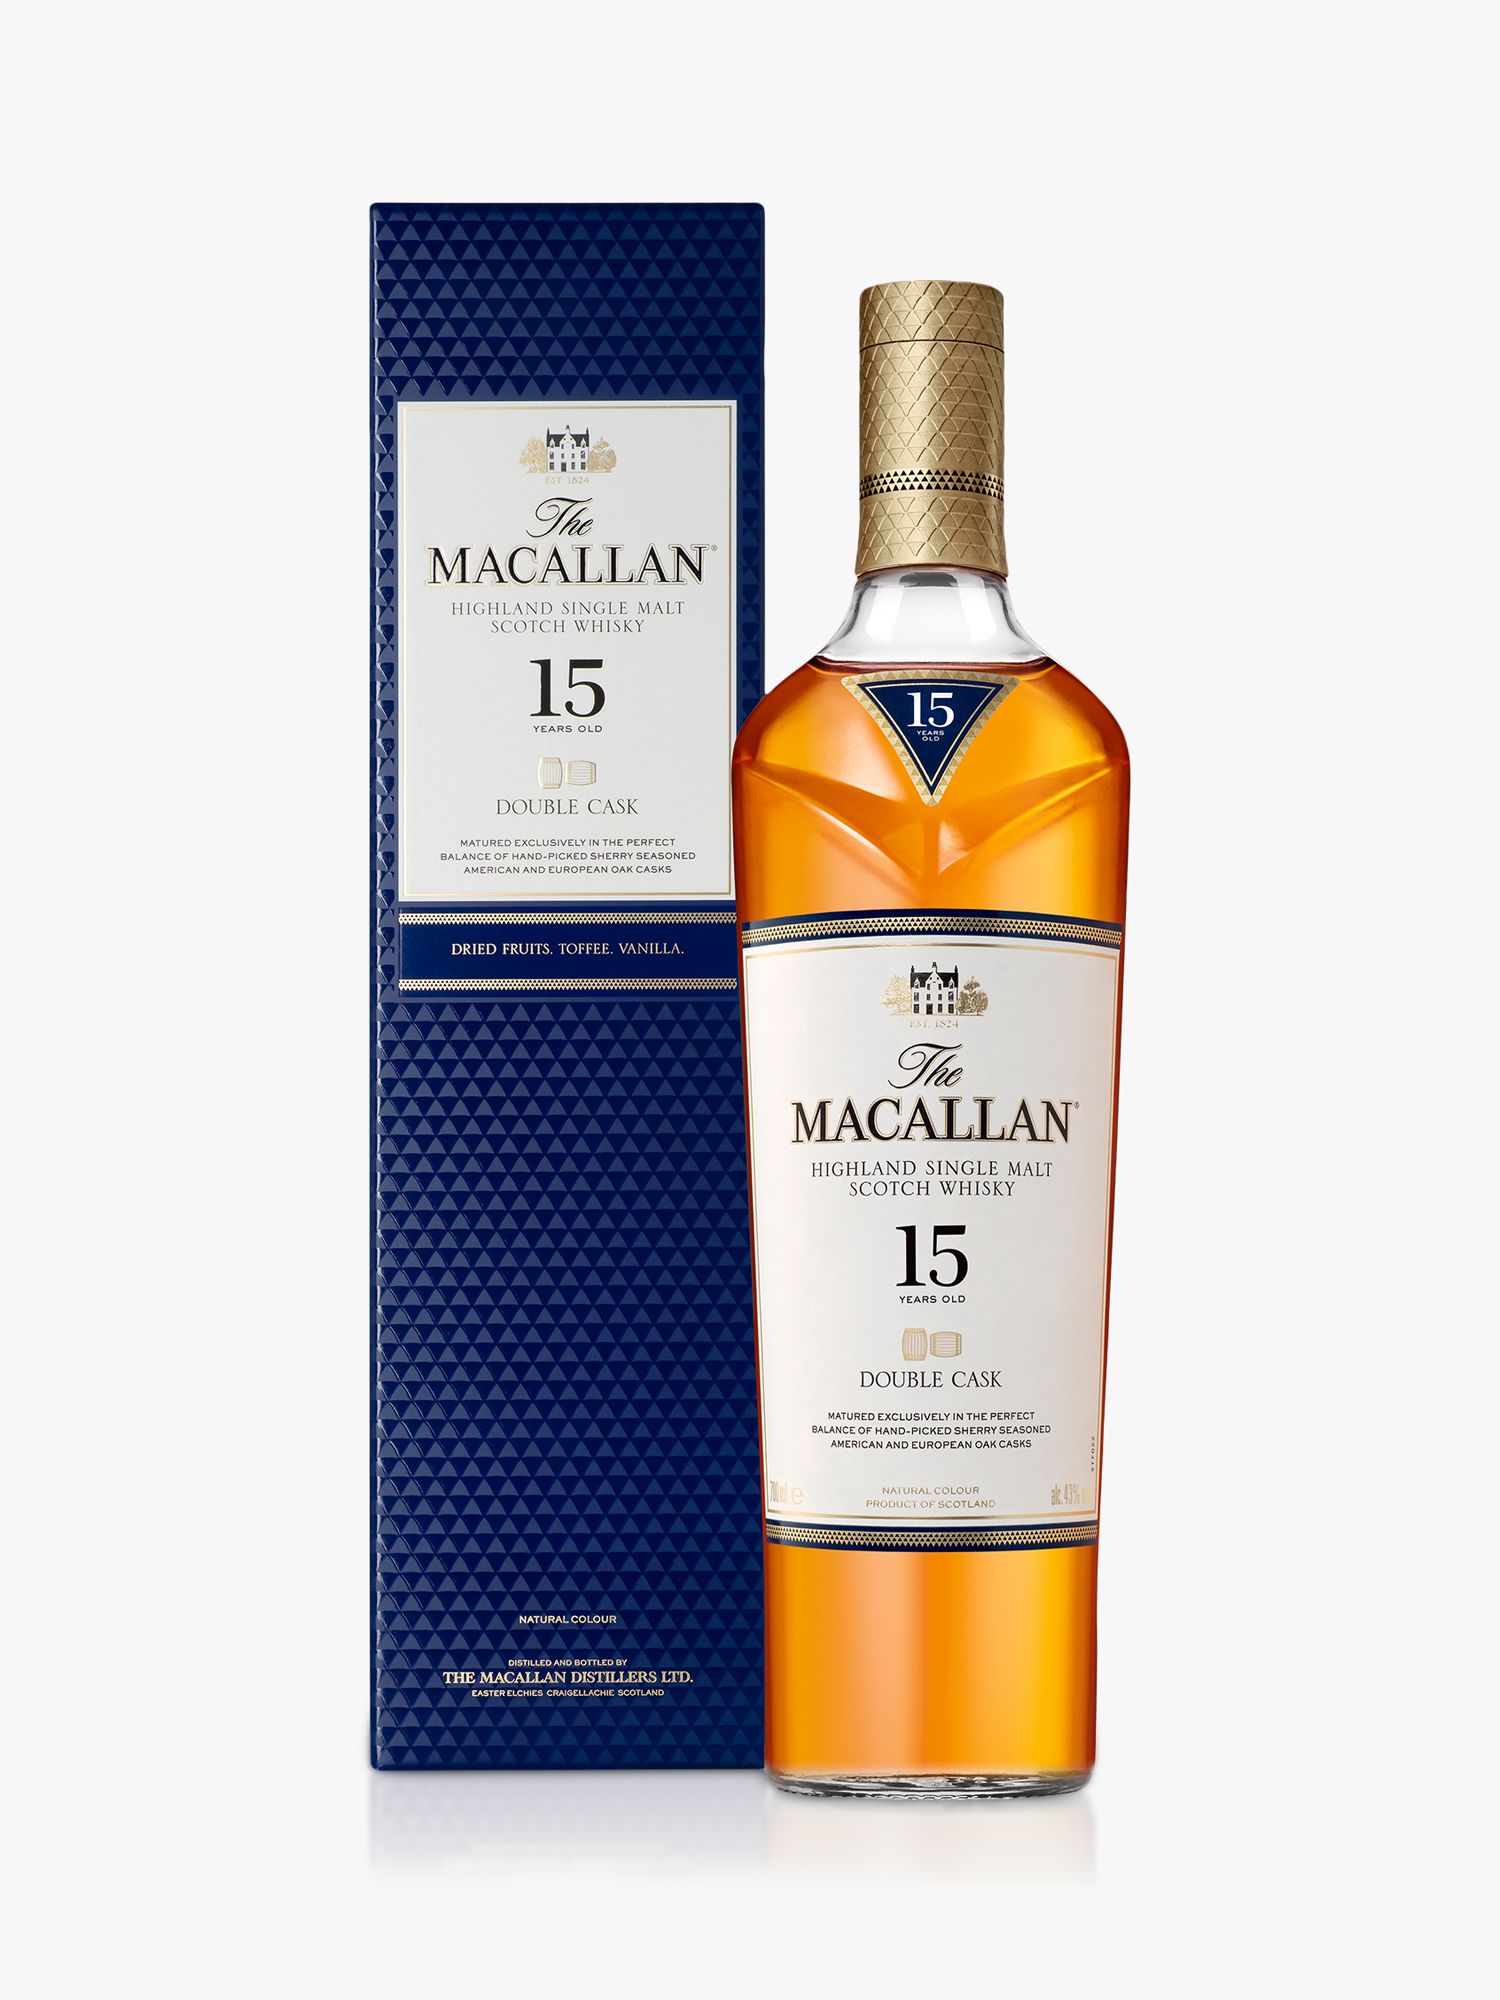 The Macallan 15 Year Old Single Malt Scotch Whisky, 70cl